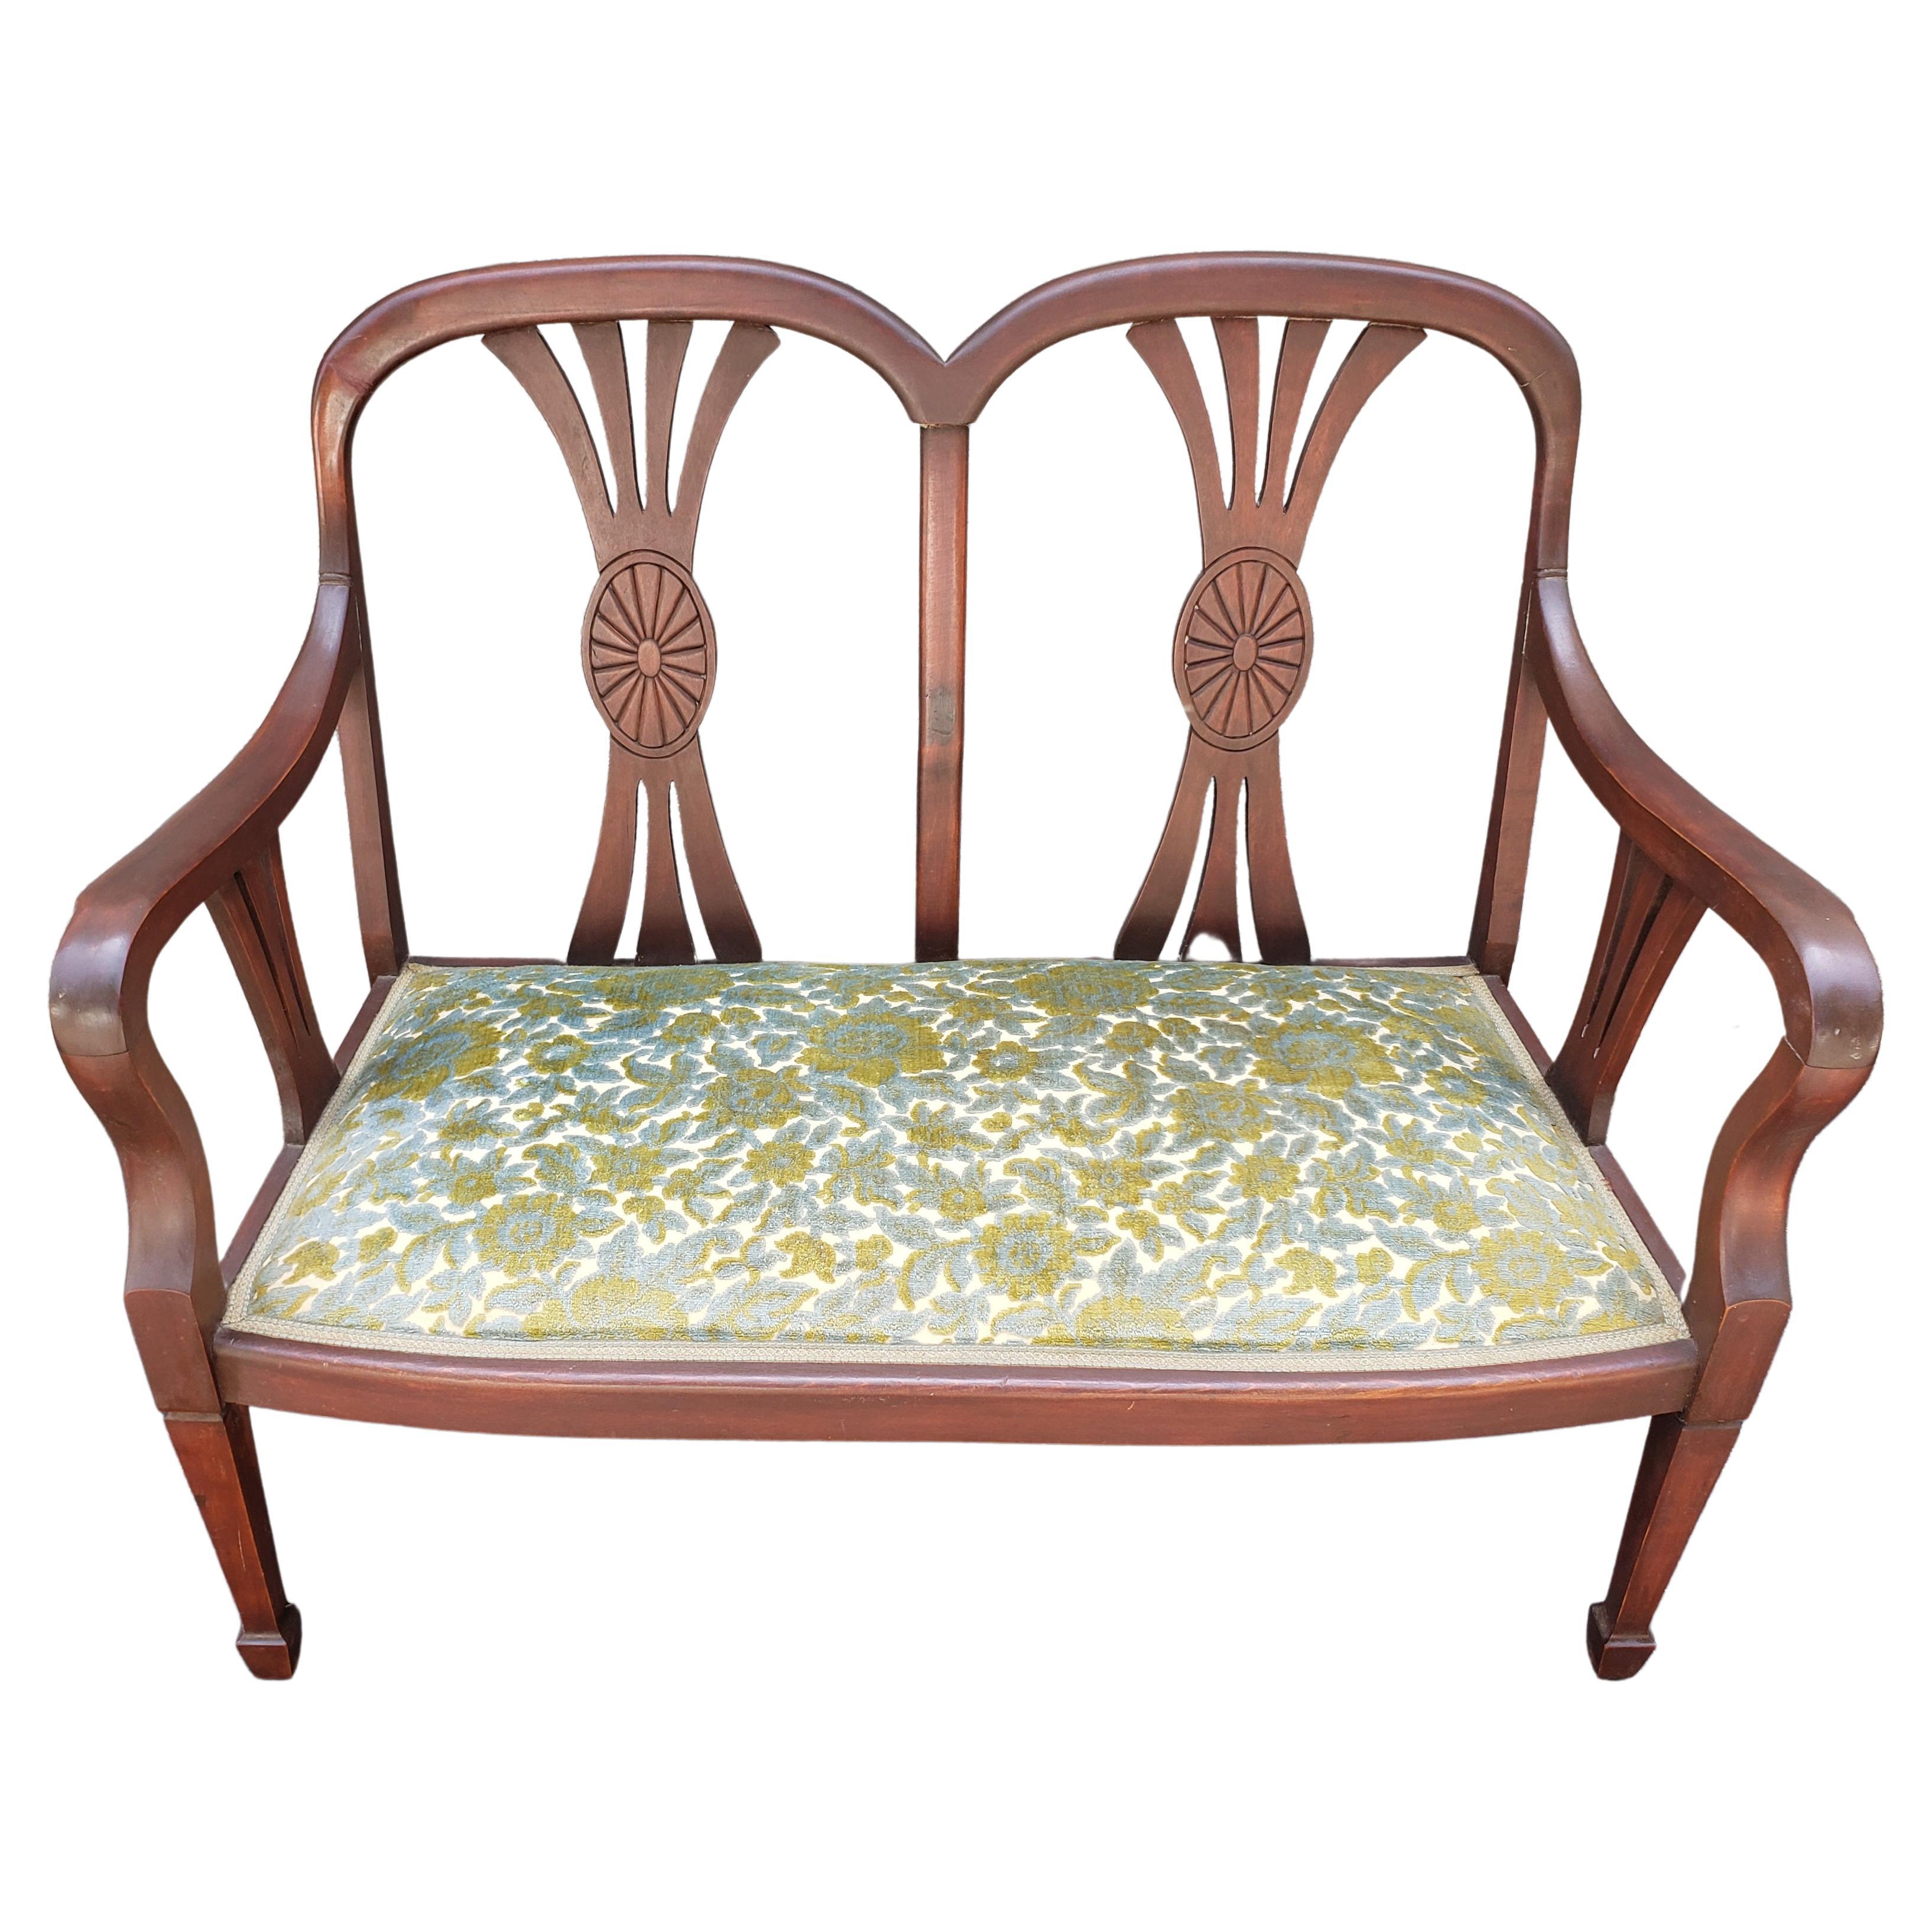 1930s Federal Style Mahogany and Crewel Upholstered Settee In Good Condition For Sale In Germantown, MD